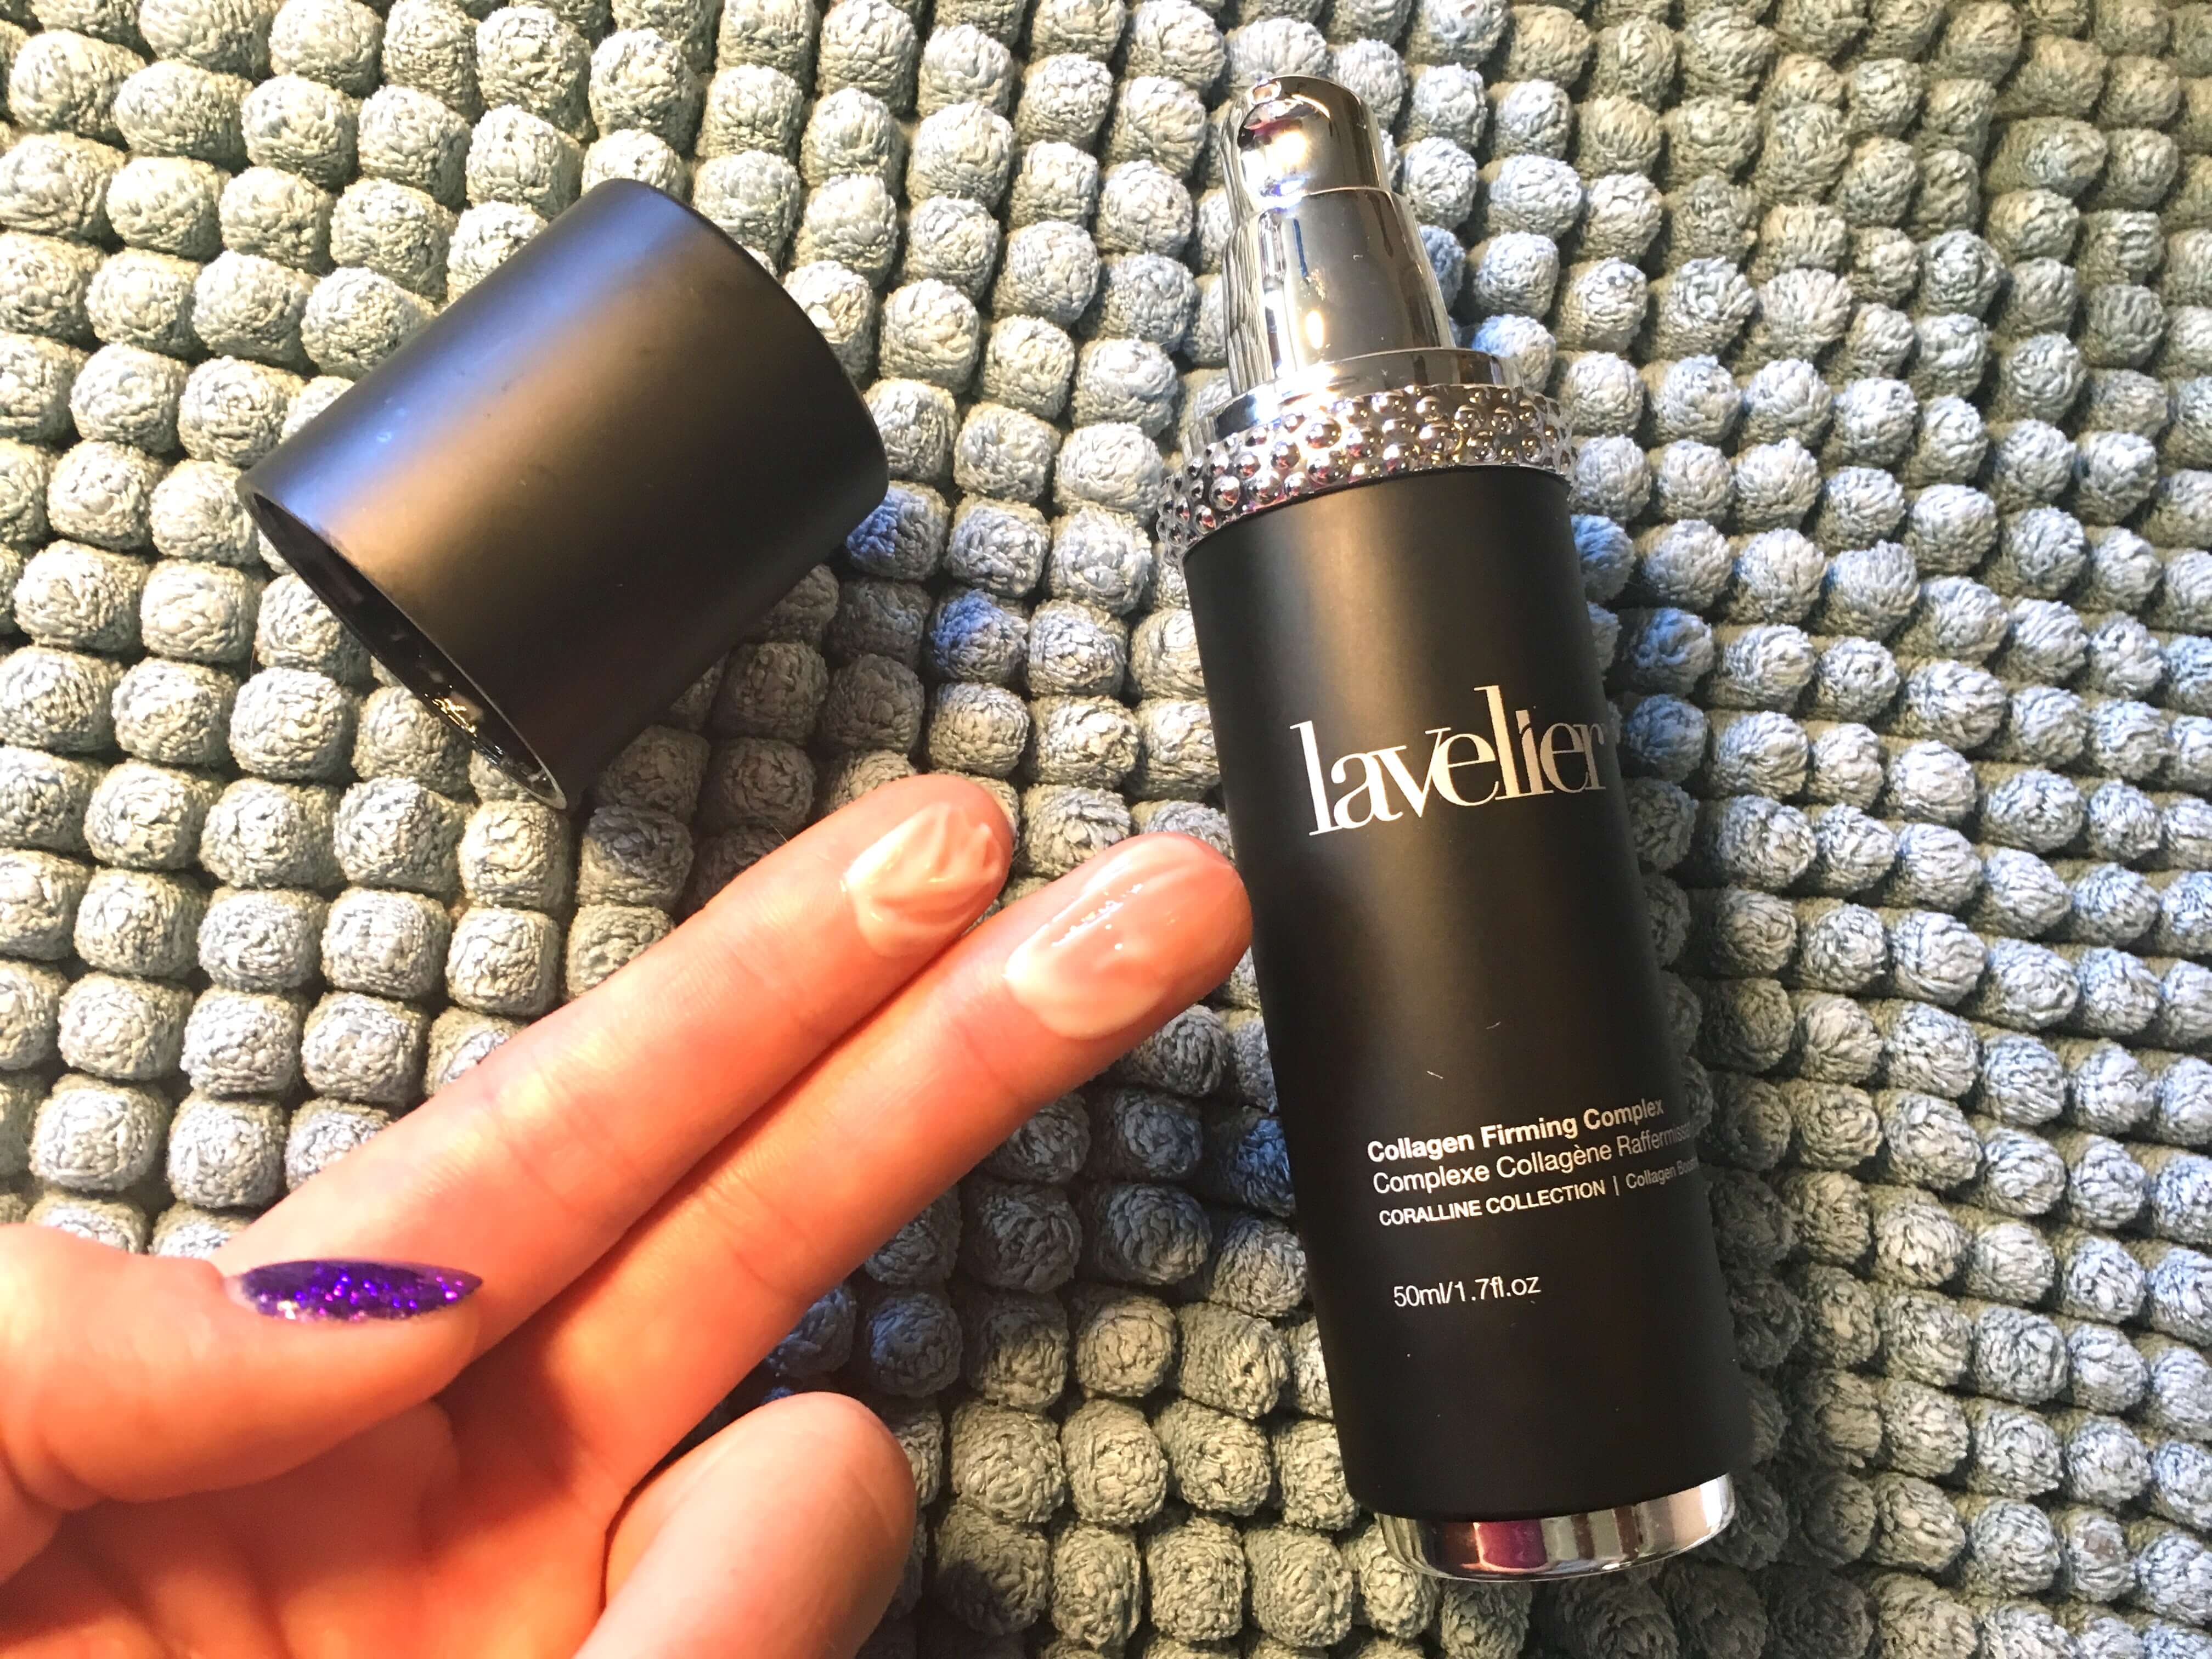 Review: Lavelier Skincare for Livelier Skin